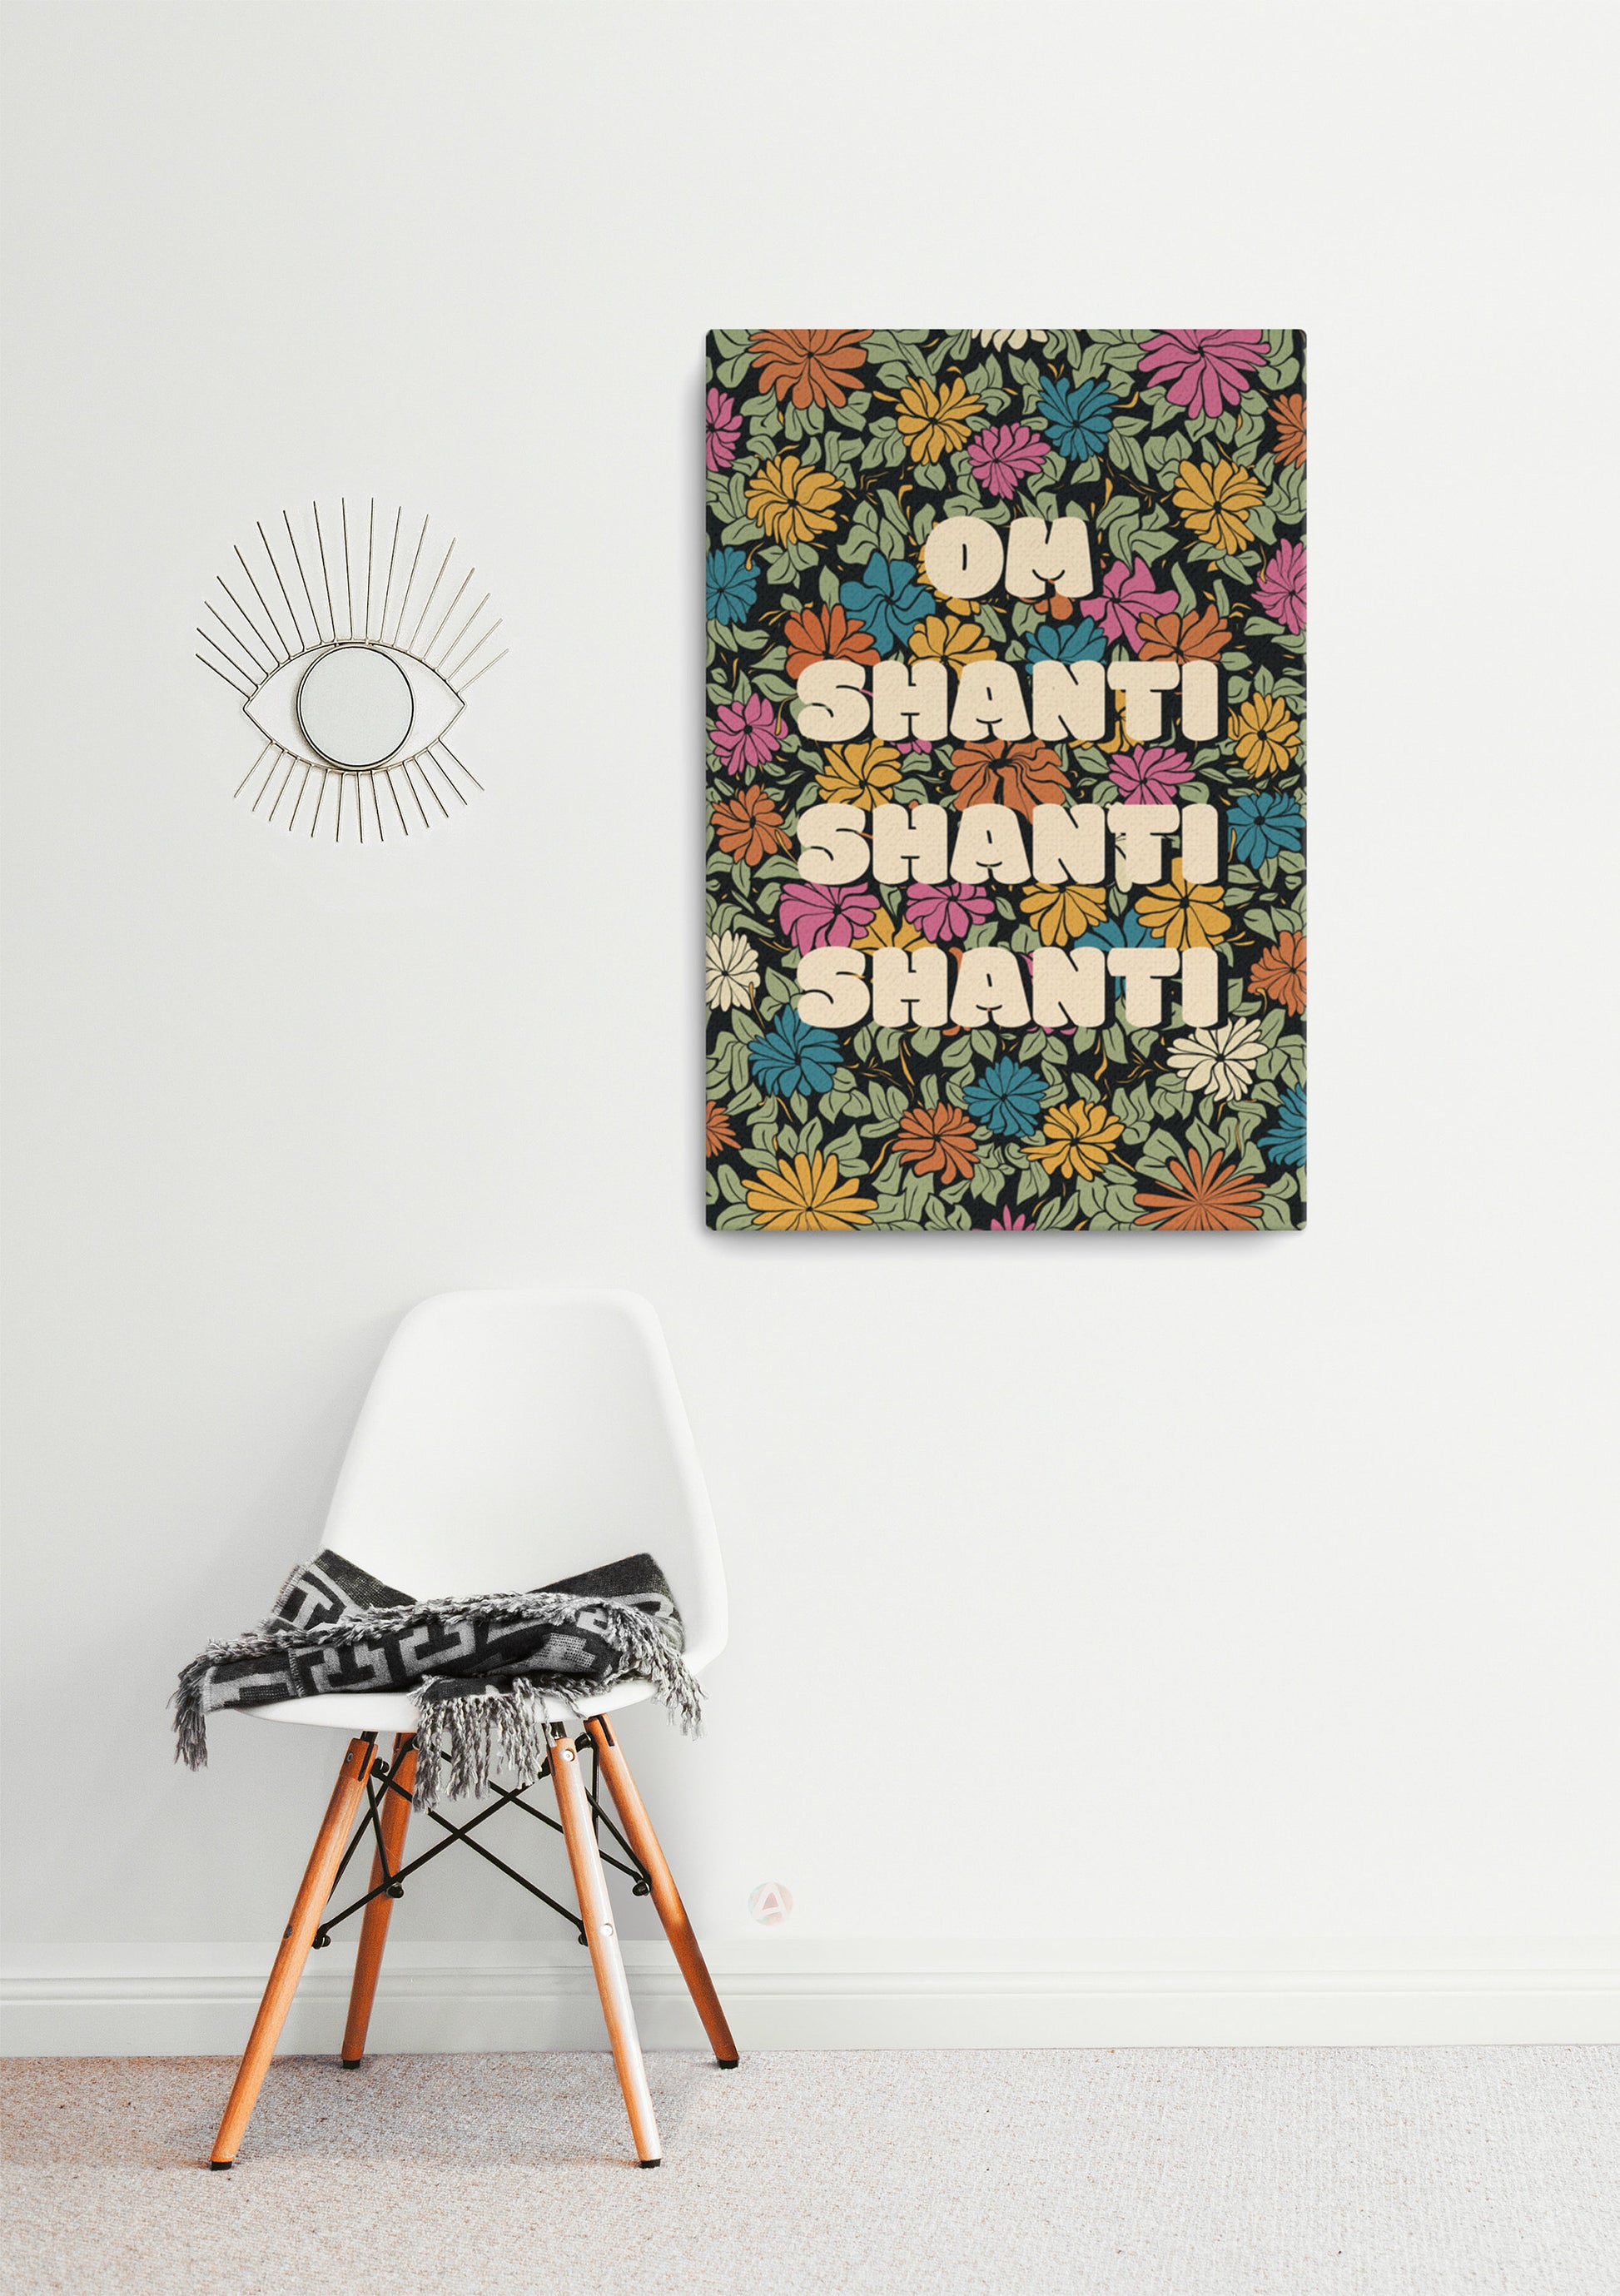 Om Shanti Mantra art print on floral colorful background art poster